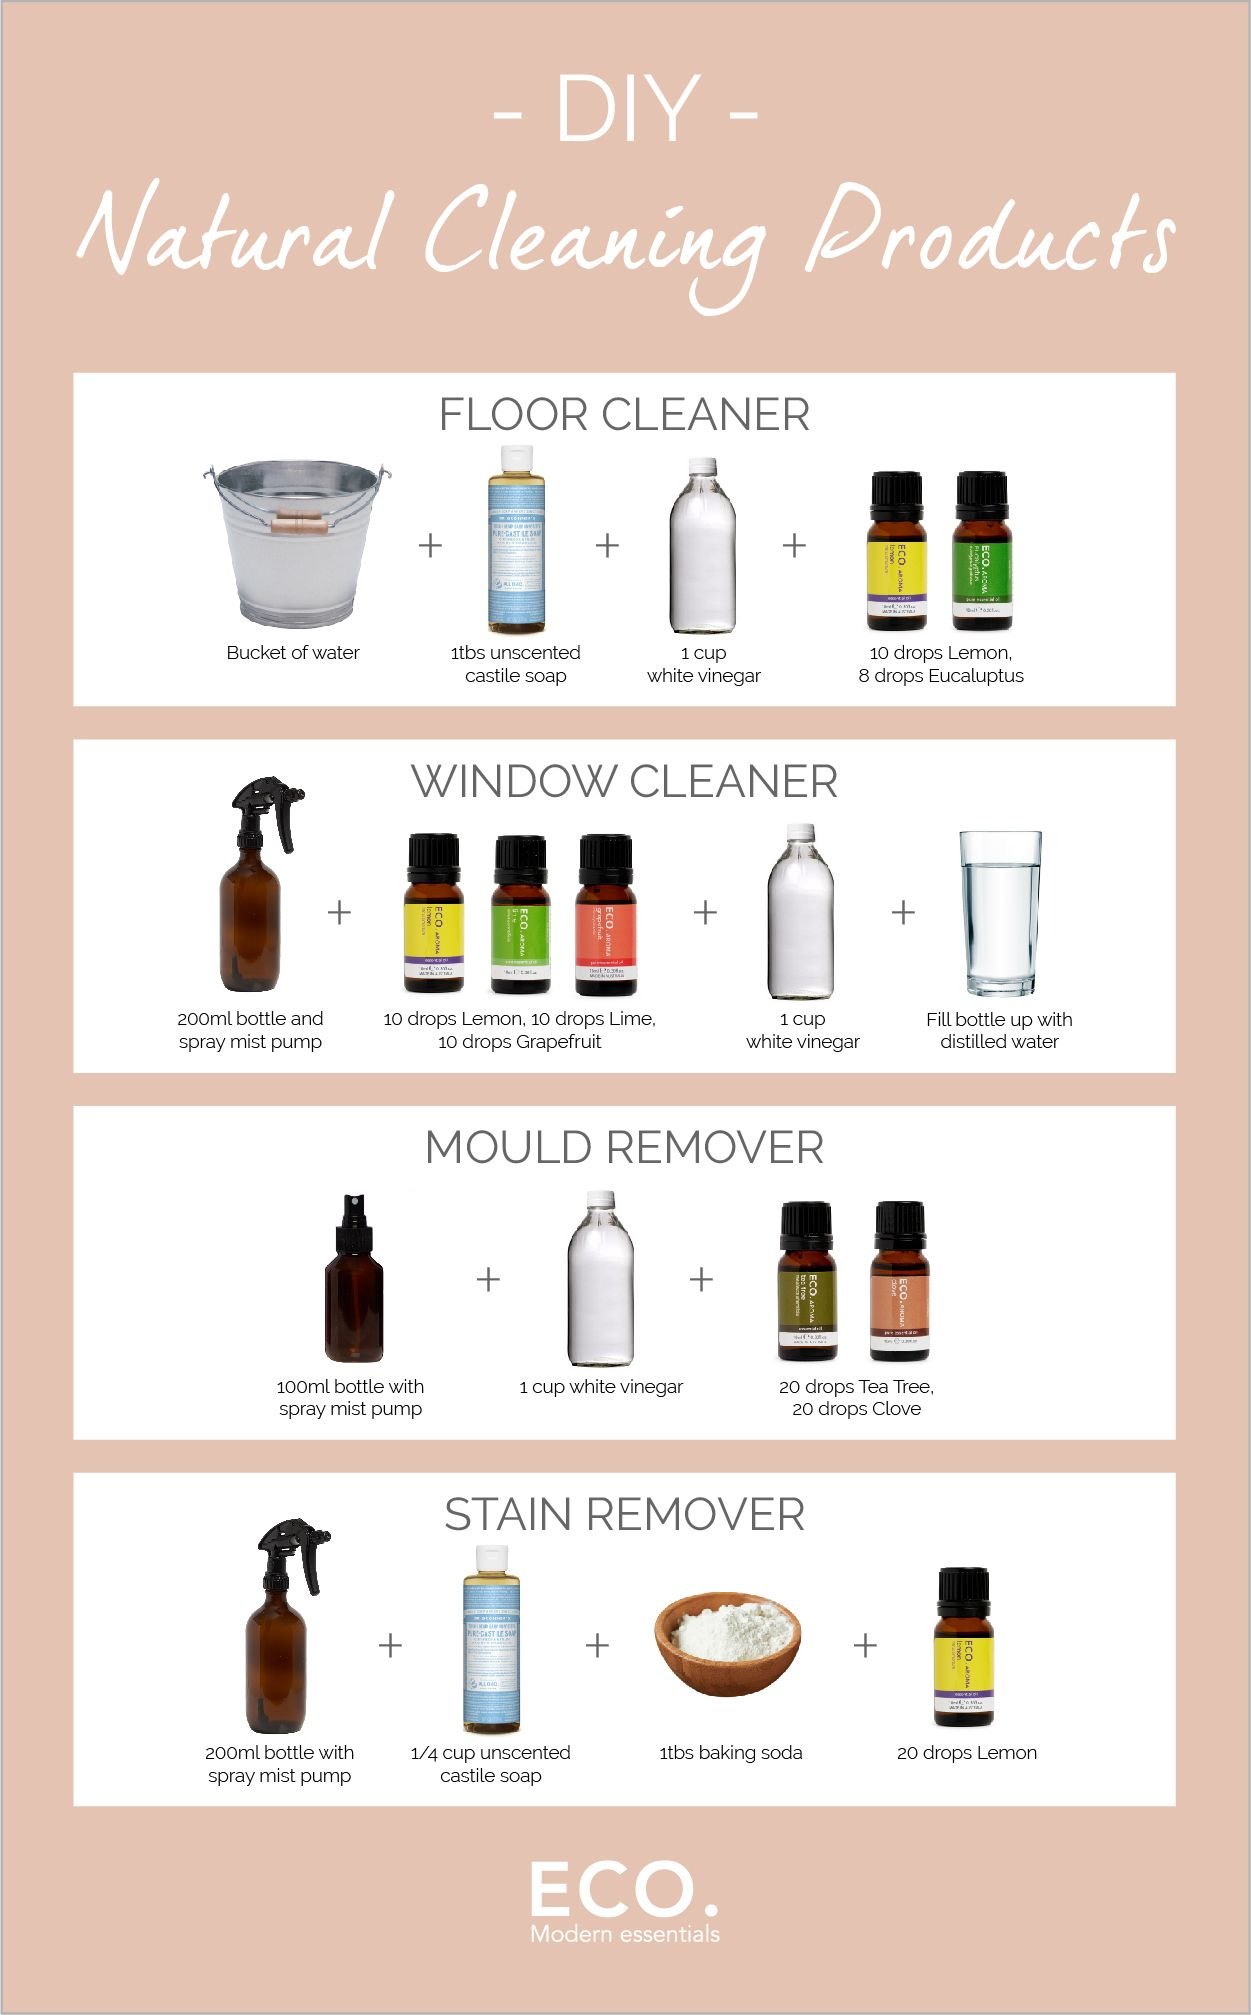 DIY Natural Cleaning Products.jpeg